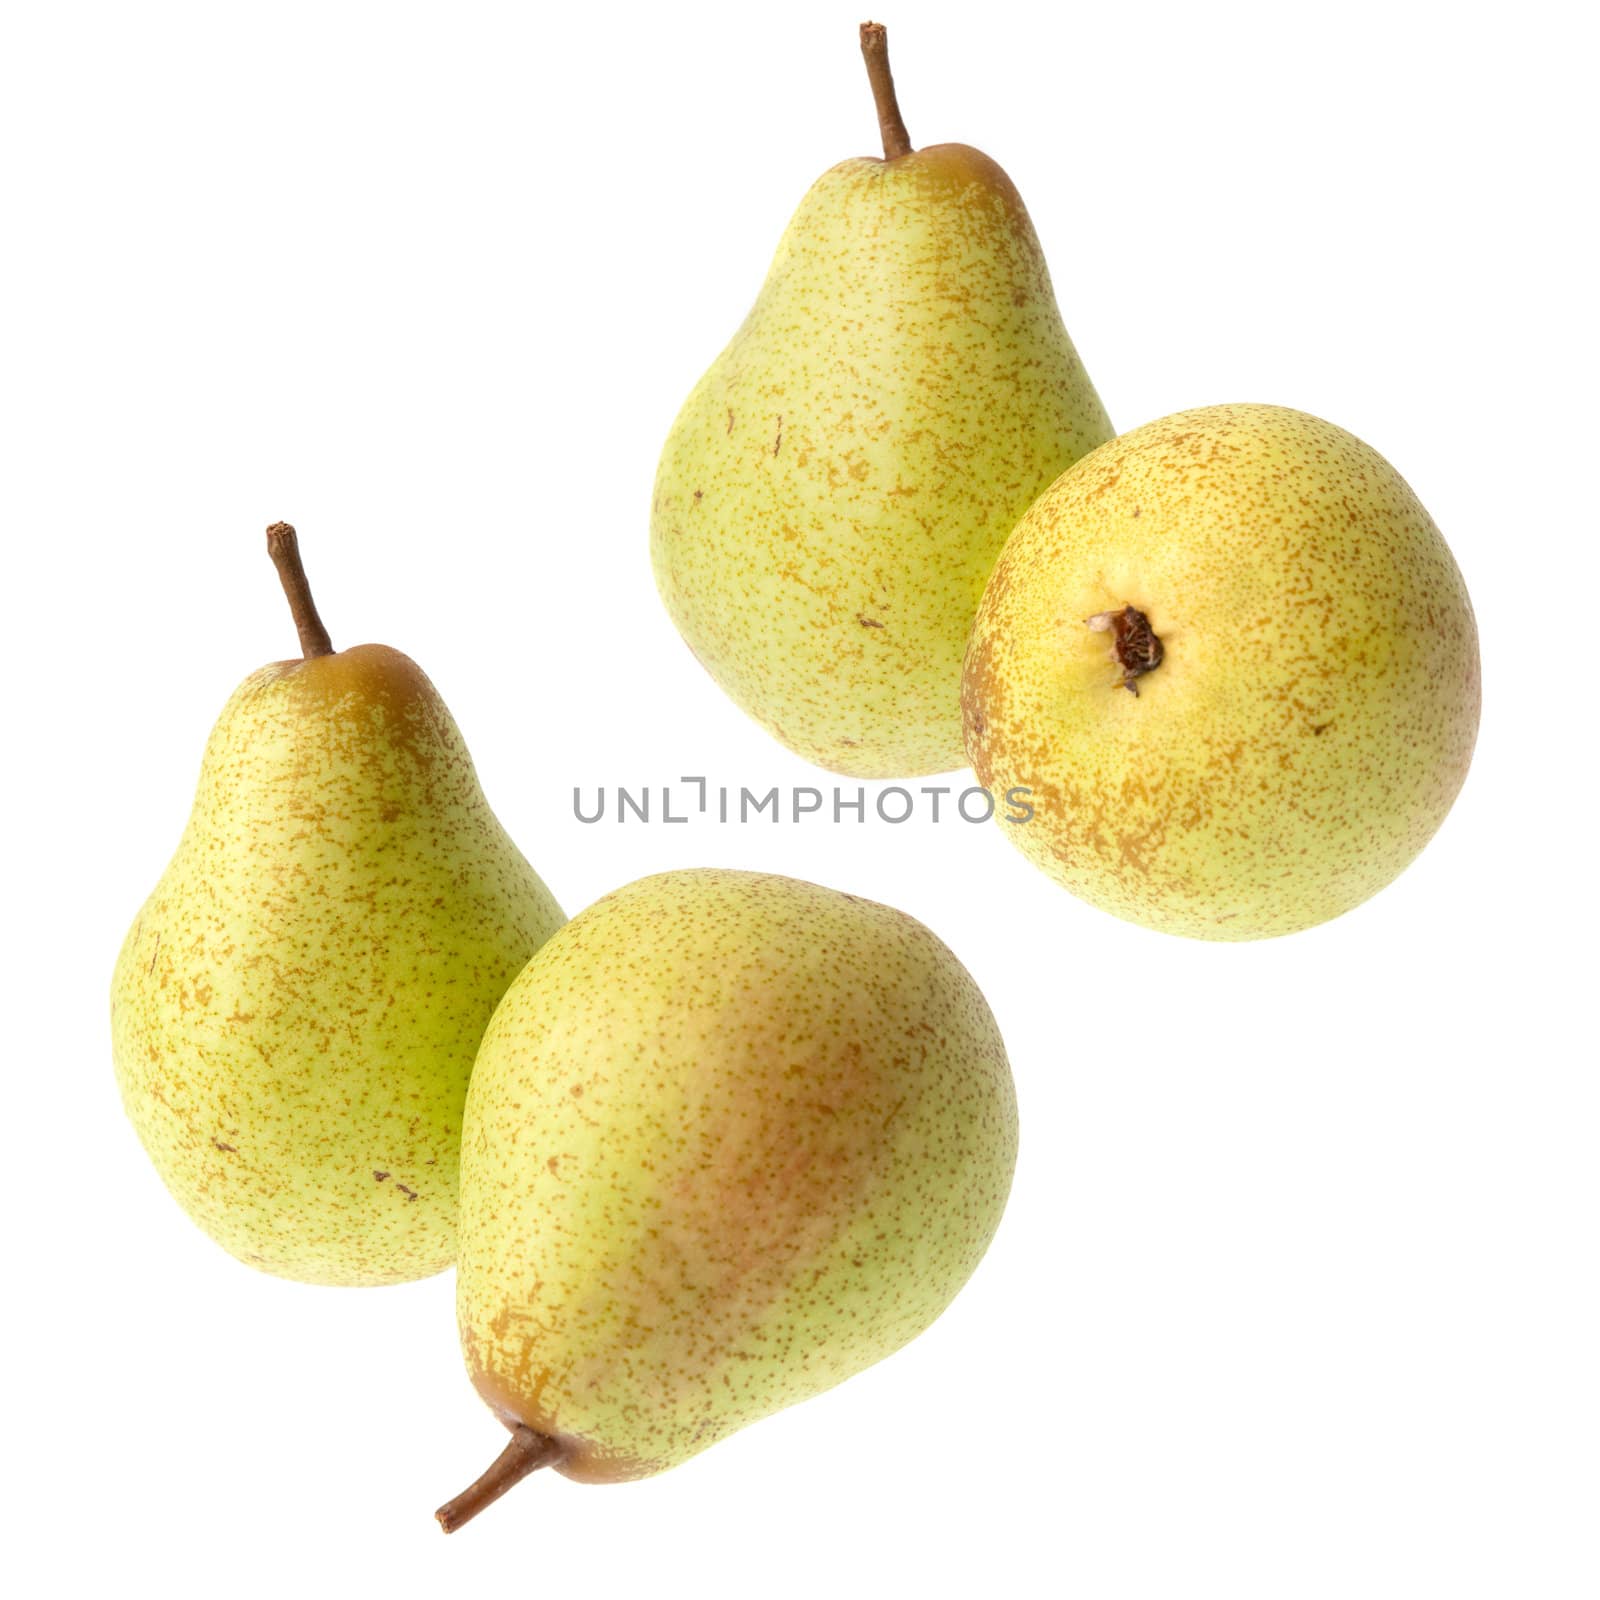 Pears isolated on a white background.